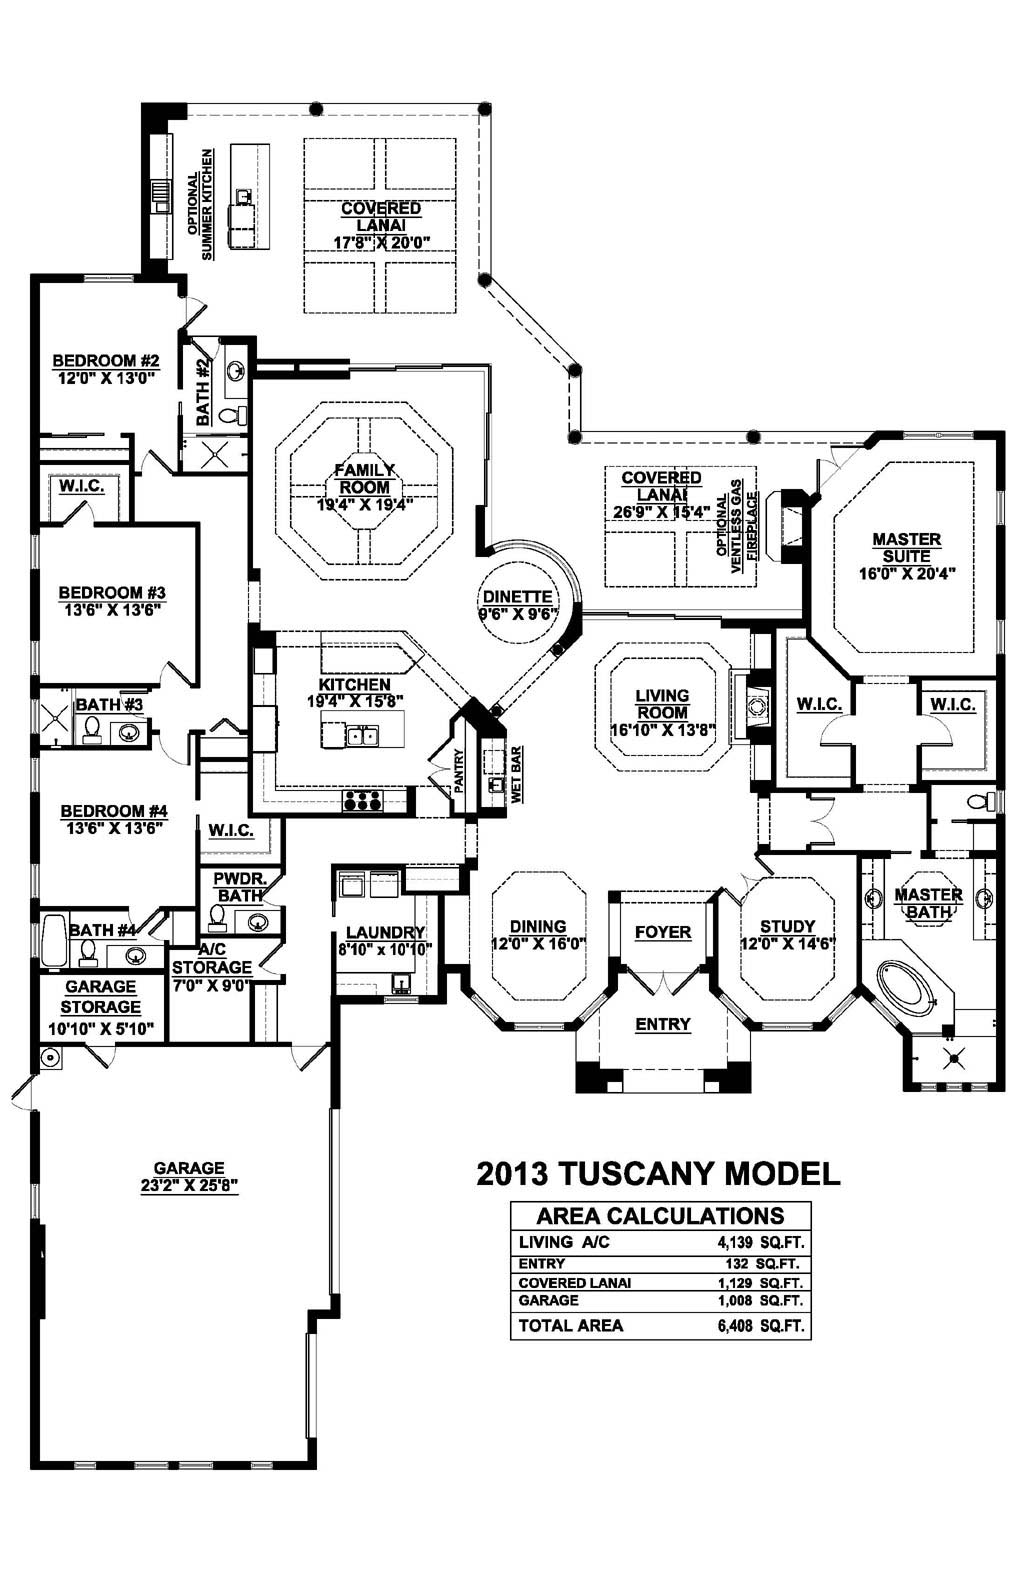 Tuscany Floor Plan in Isla Del Sol at Fiddlers Creek, Naples, Stock Construction, 4 bedroom, 4.5 bath, living room, family room, dining room, dinette, study, 3-car garage with A/C storage area